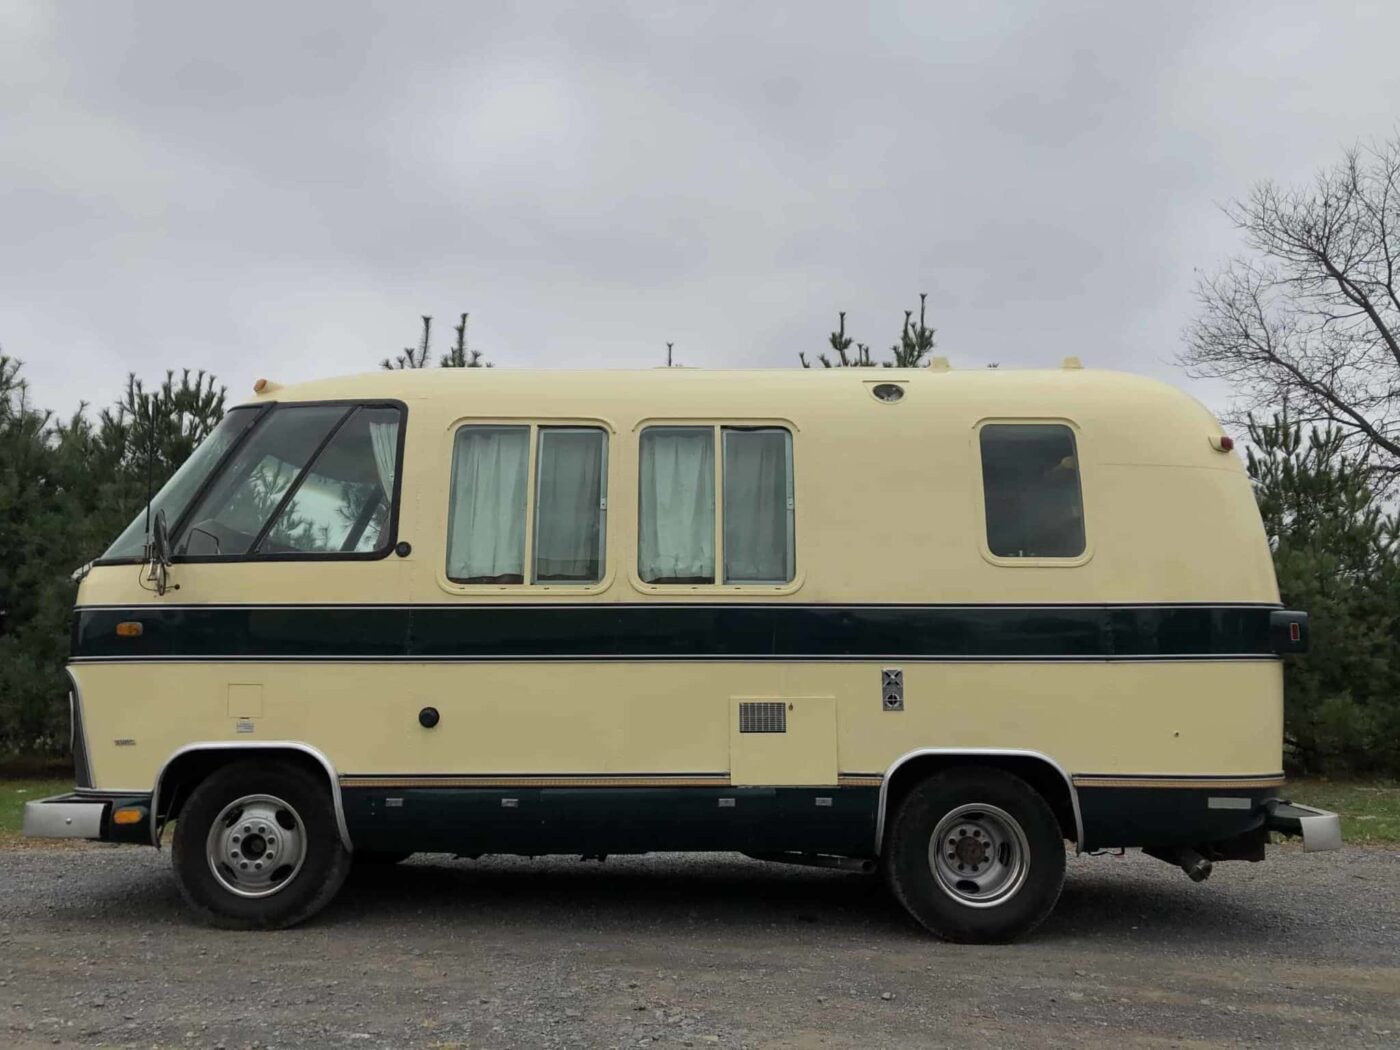 1975 Airstream 20FT Argosy Motorhome For Sale in Chambersburg Airstream Argosy 20 Motorhome For Sale